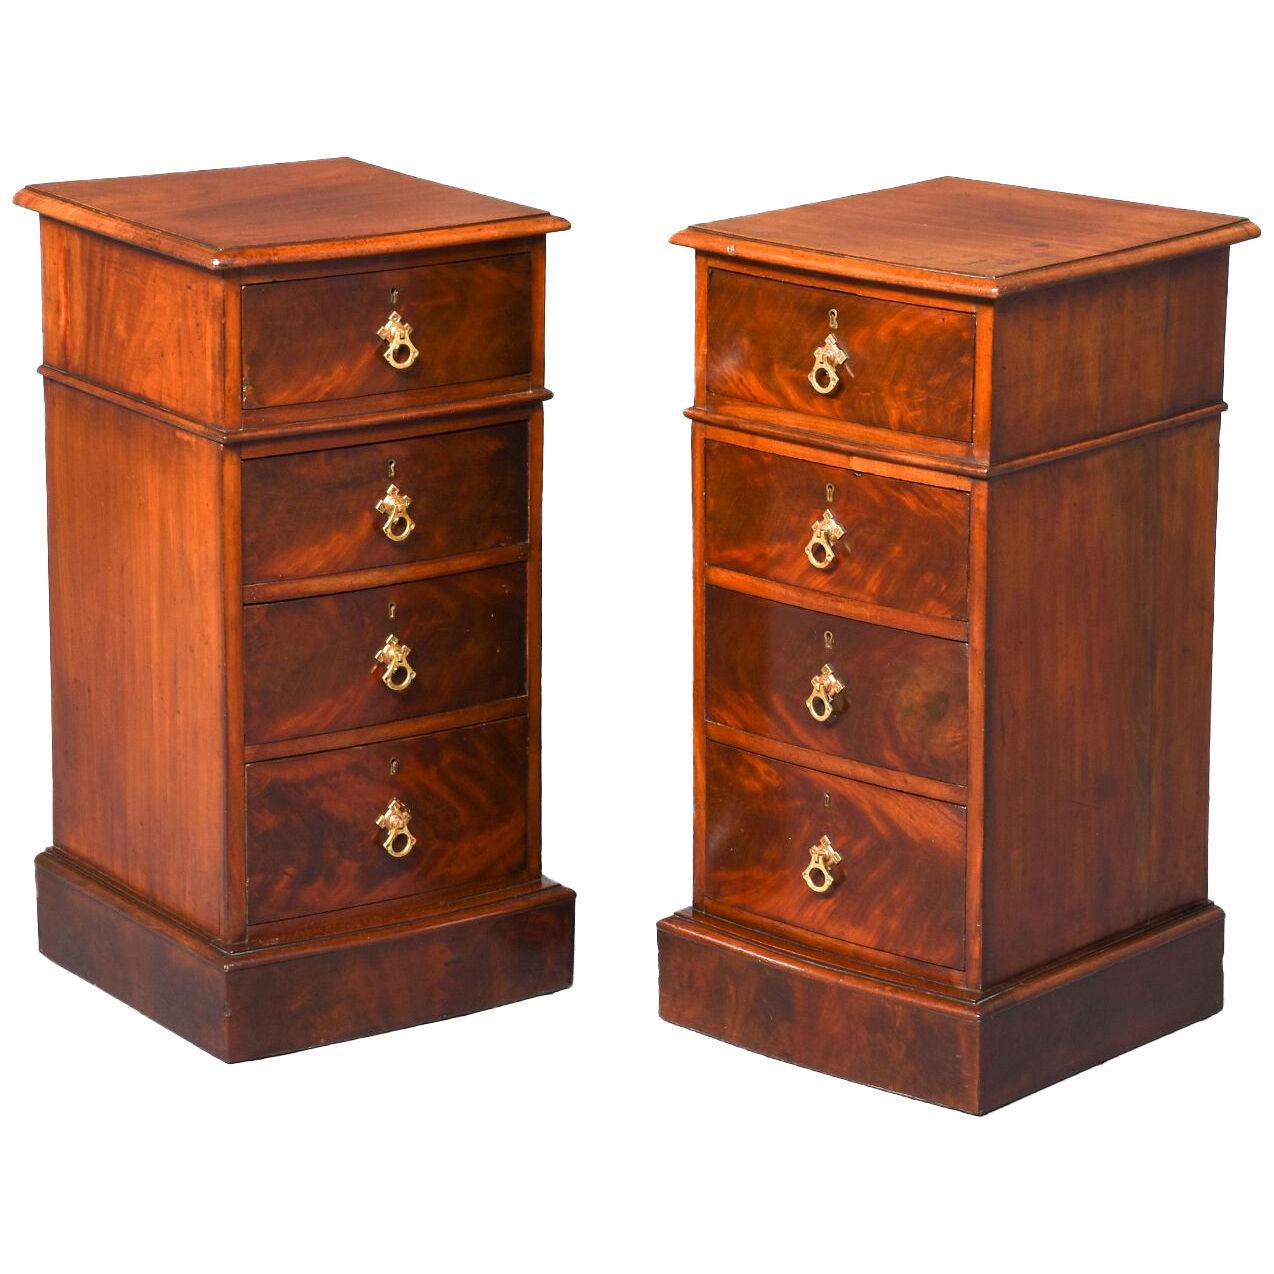 Pair Of Victorian Mahogany Small Chests/Bedside Lockers